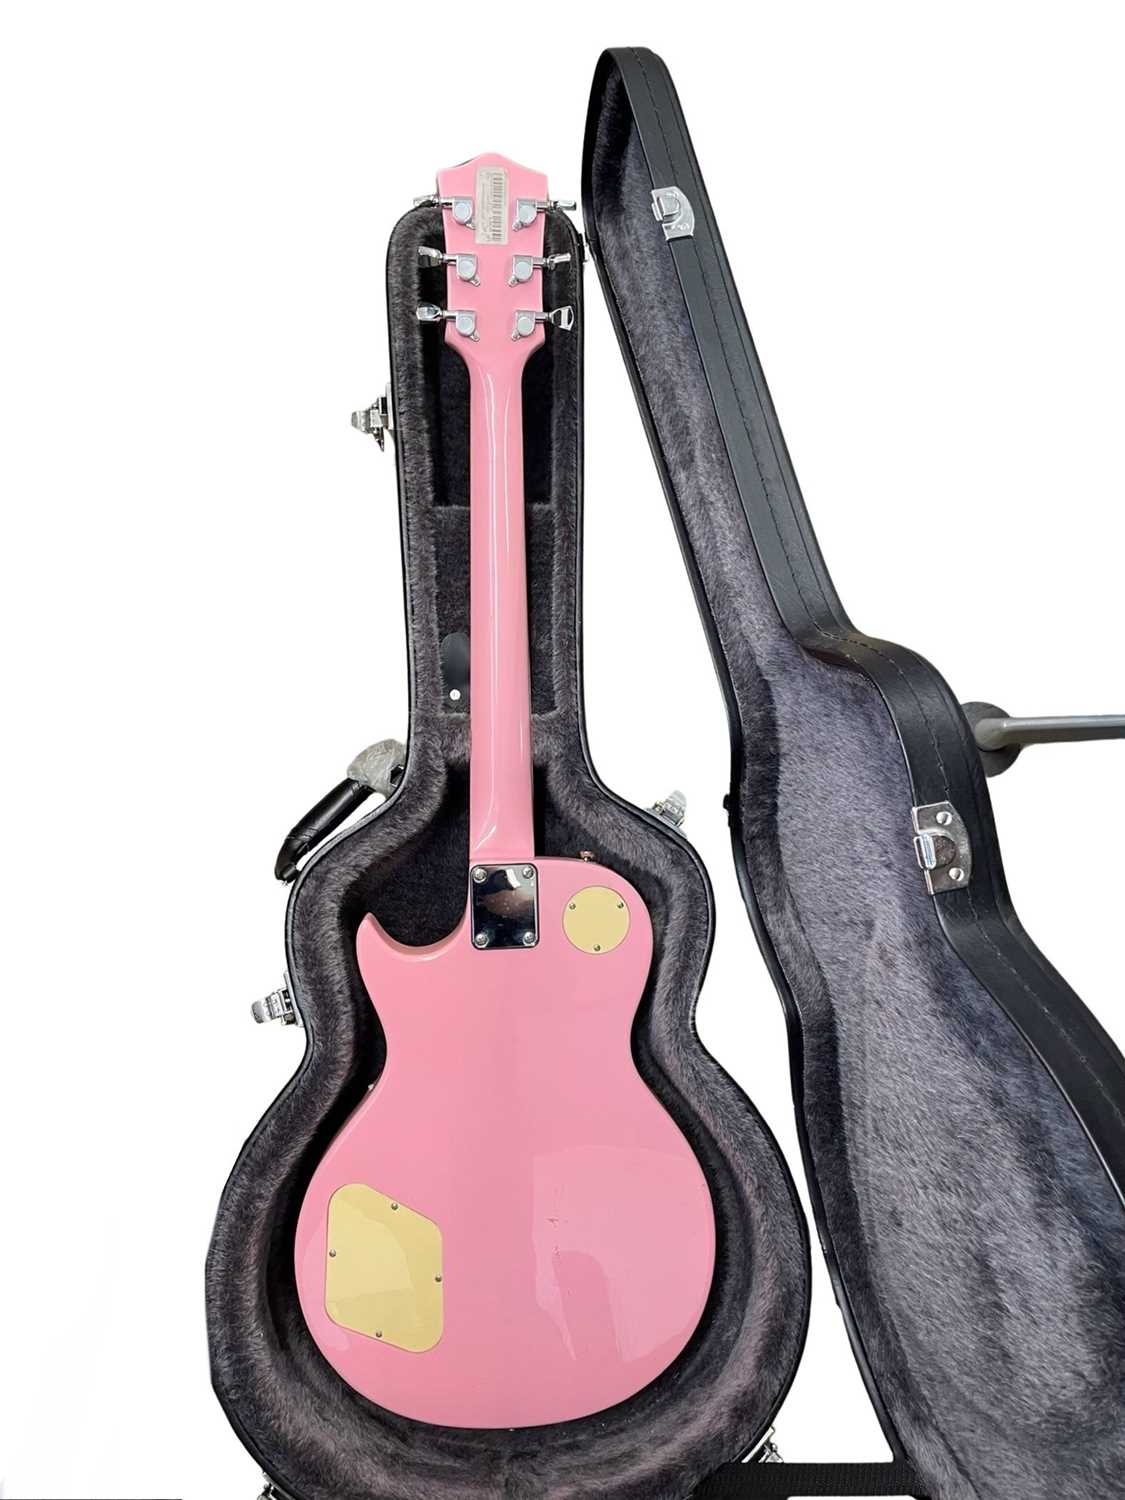 A Nevada Les Paul style electric guitar in baby pink, with fitted lined hardcase (not original to - Image 2 of 4